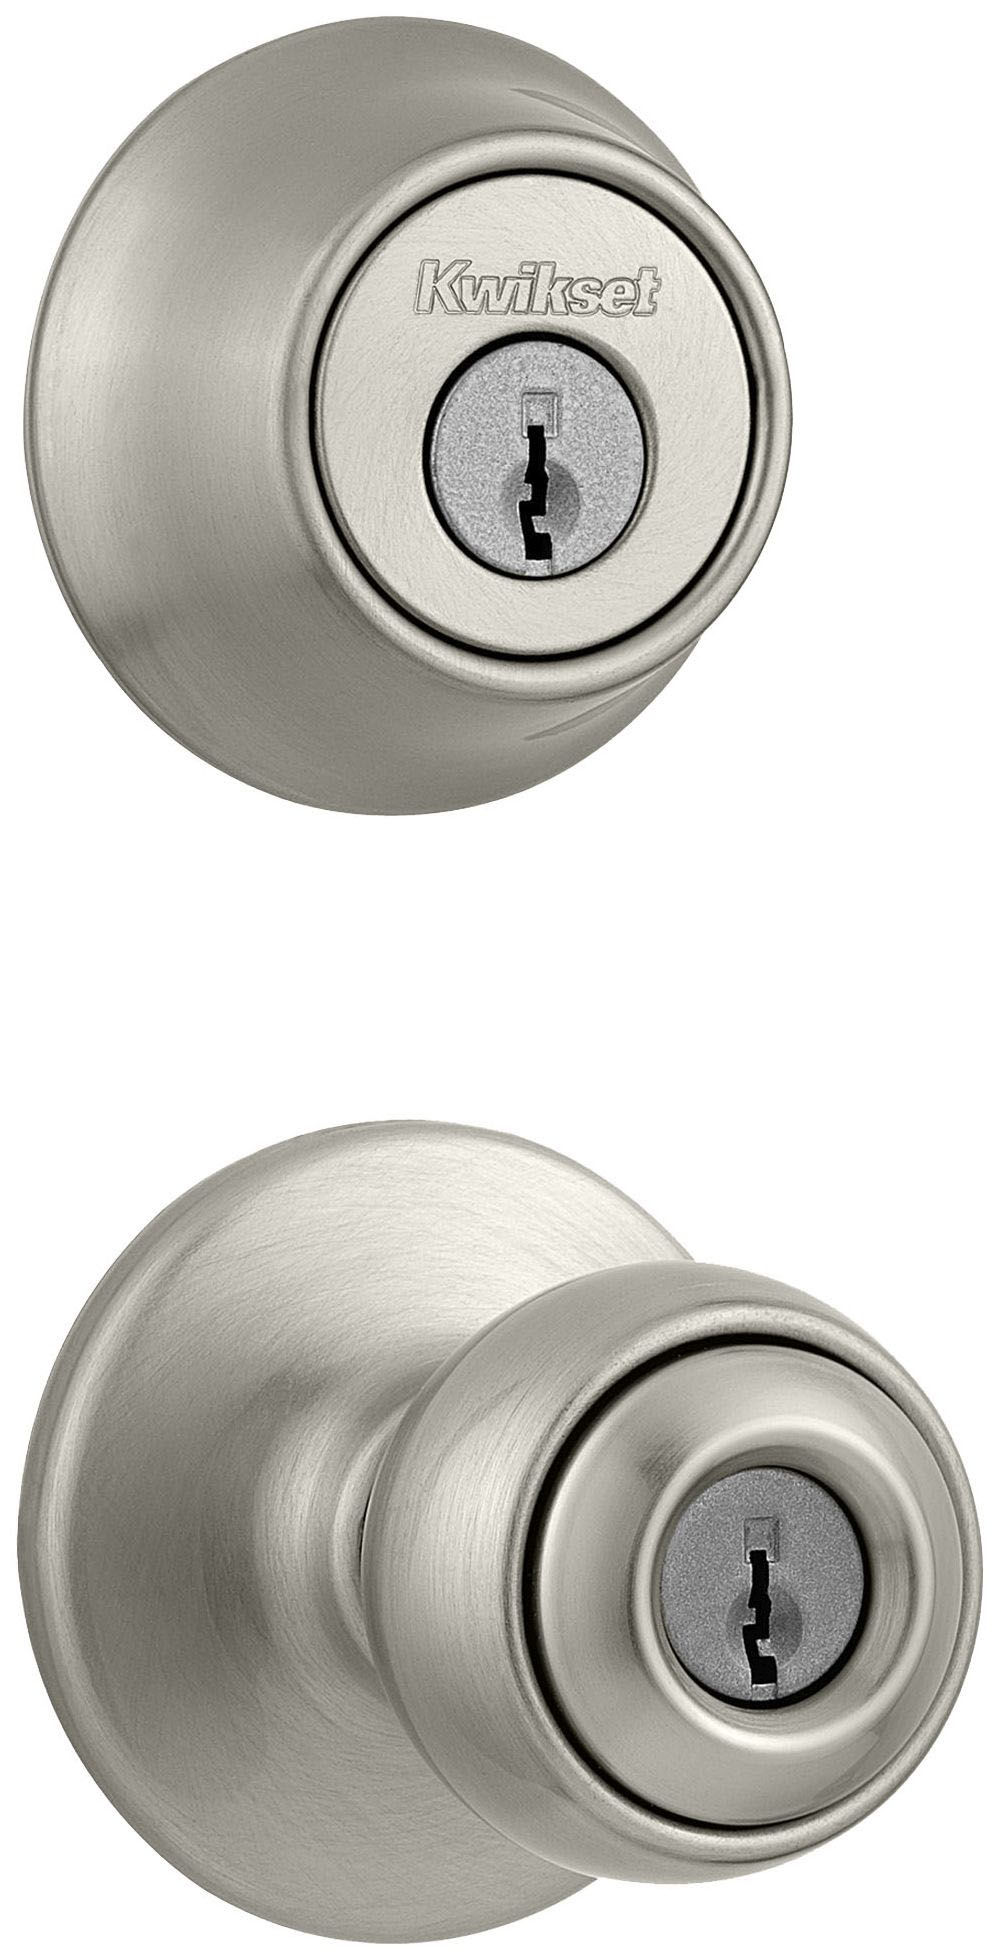 Kwikset CP690P-15 Satin Nickel Polo Keyed Single Cylinder Knobset and  Deadbolt Combo Pack